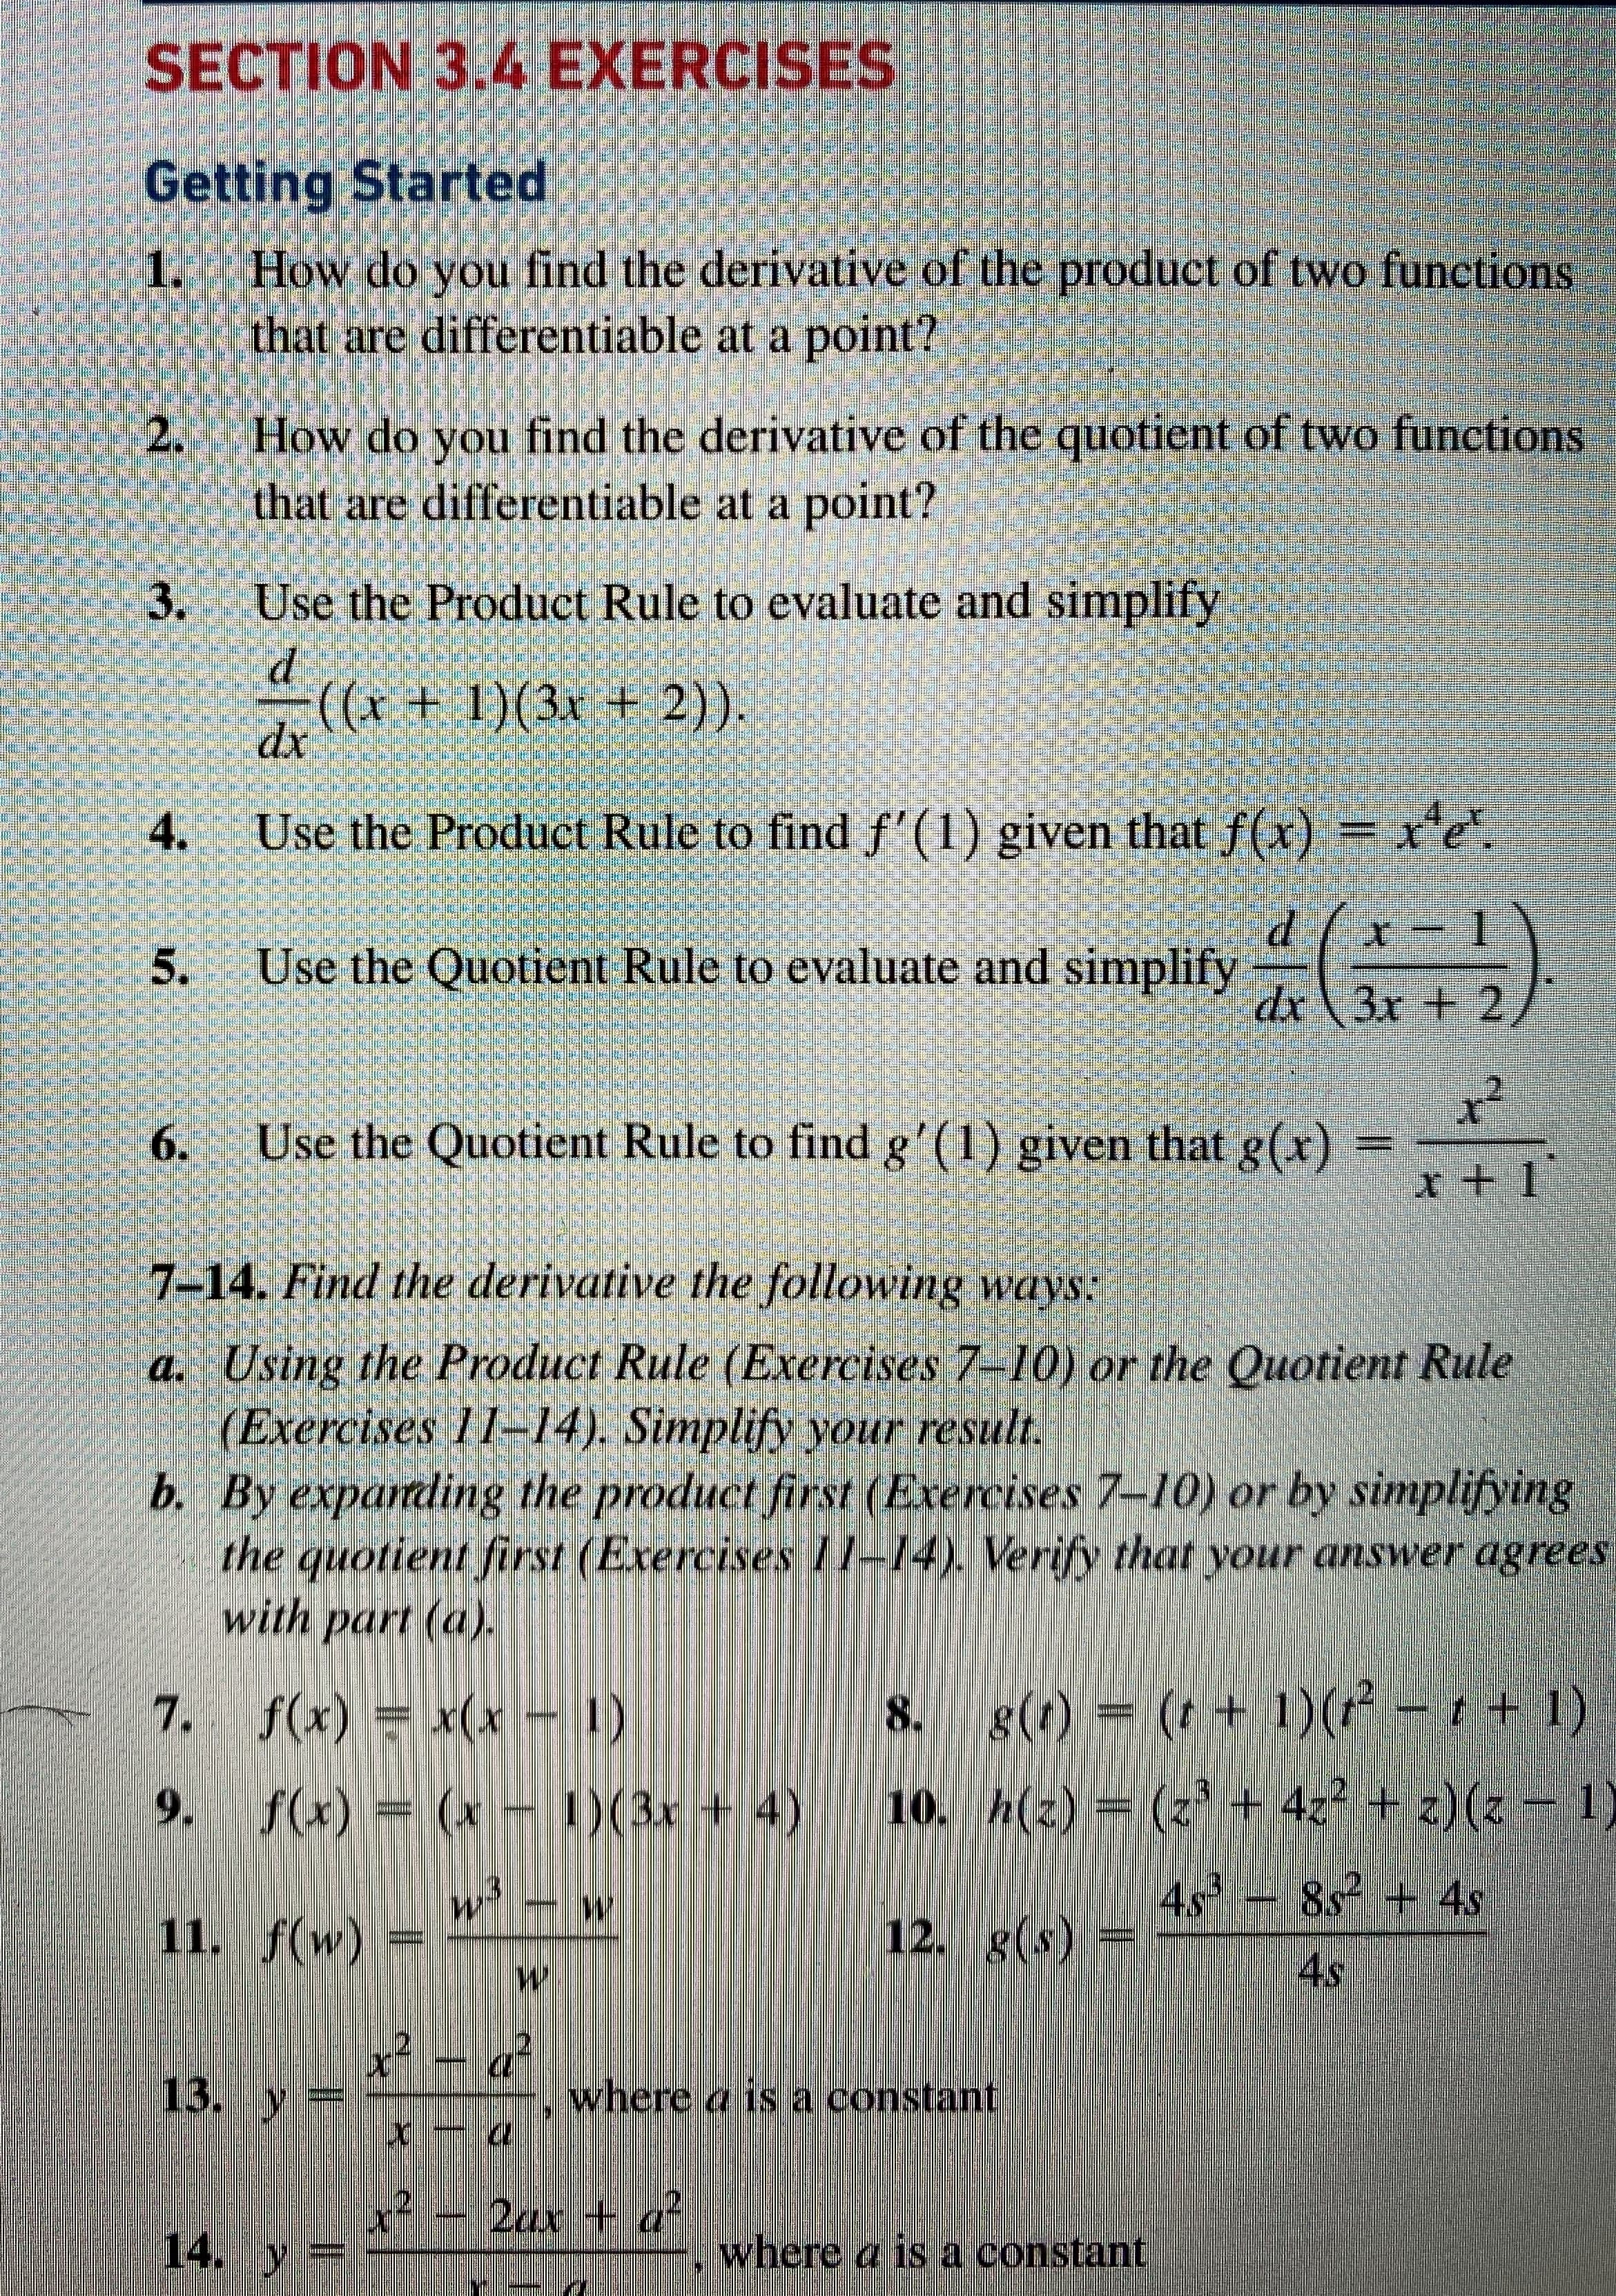 SECTION 3.4 EXERCISES
Getting Started
1.
How do you find the derivative of the product of two funetions
that are differentiable at a point?
How do you find the derivative of the quotient of two functions
that are differentiable at a point?
2.
3.
Use the Product Rule to evaluate and simplify
((x + 1)(3x + 2)).
dx
4.
Use the Product Rule to find f'(1) given that f(x) = x'e
.
Use the Quotient Rule to evaluate and simplify
dx\3x + 2,
6.
Use the Quotient Rule to find g'(1) given that g(x)
r + 1
7-14. Find the derivative the following ways:
a. Using the Product Rule (Exercises 7-10) or the Quotient Rule
(Exercises 11-14). Simplify your result.
b. By exparading the product first (Exercises 7-10) or by simplifving
the quotient first (Exercises I1-4), Verify that your answer agrees
with part (a).
7. f(x) = x(x - 1)
8. g(t) = (t + 1)(r - t + 1)
9. f(x) (x - )(3x + 4)
10. h(2) = (z' + 42 + z)(z =
11. f(w) =
4.s
12. g(s)
4s - 8s + 4s
4s
13. y
where a is a constant
2ax + a
14. y
where a is a constant
5.
